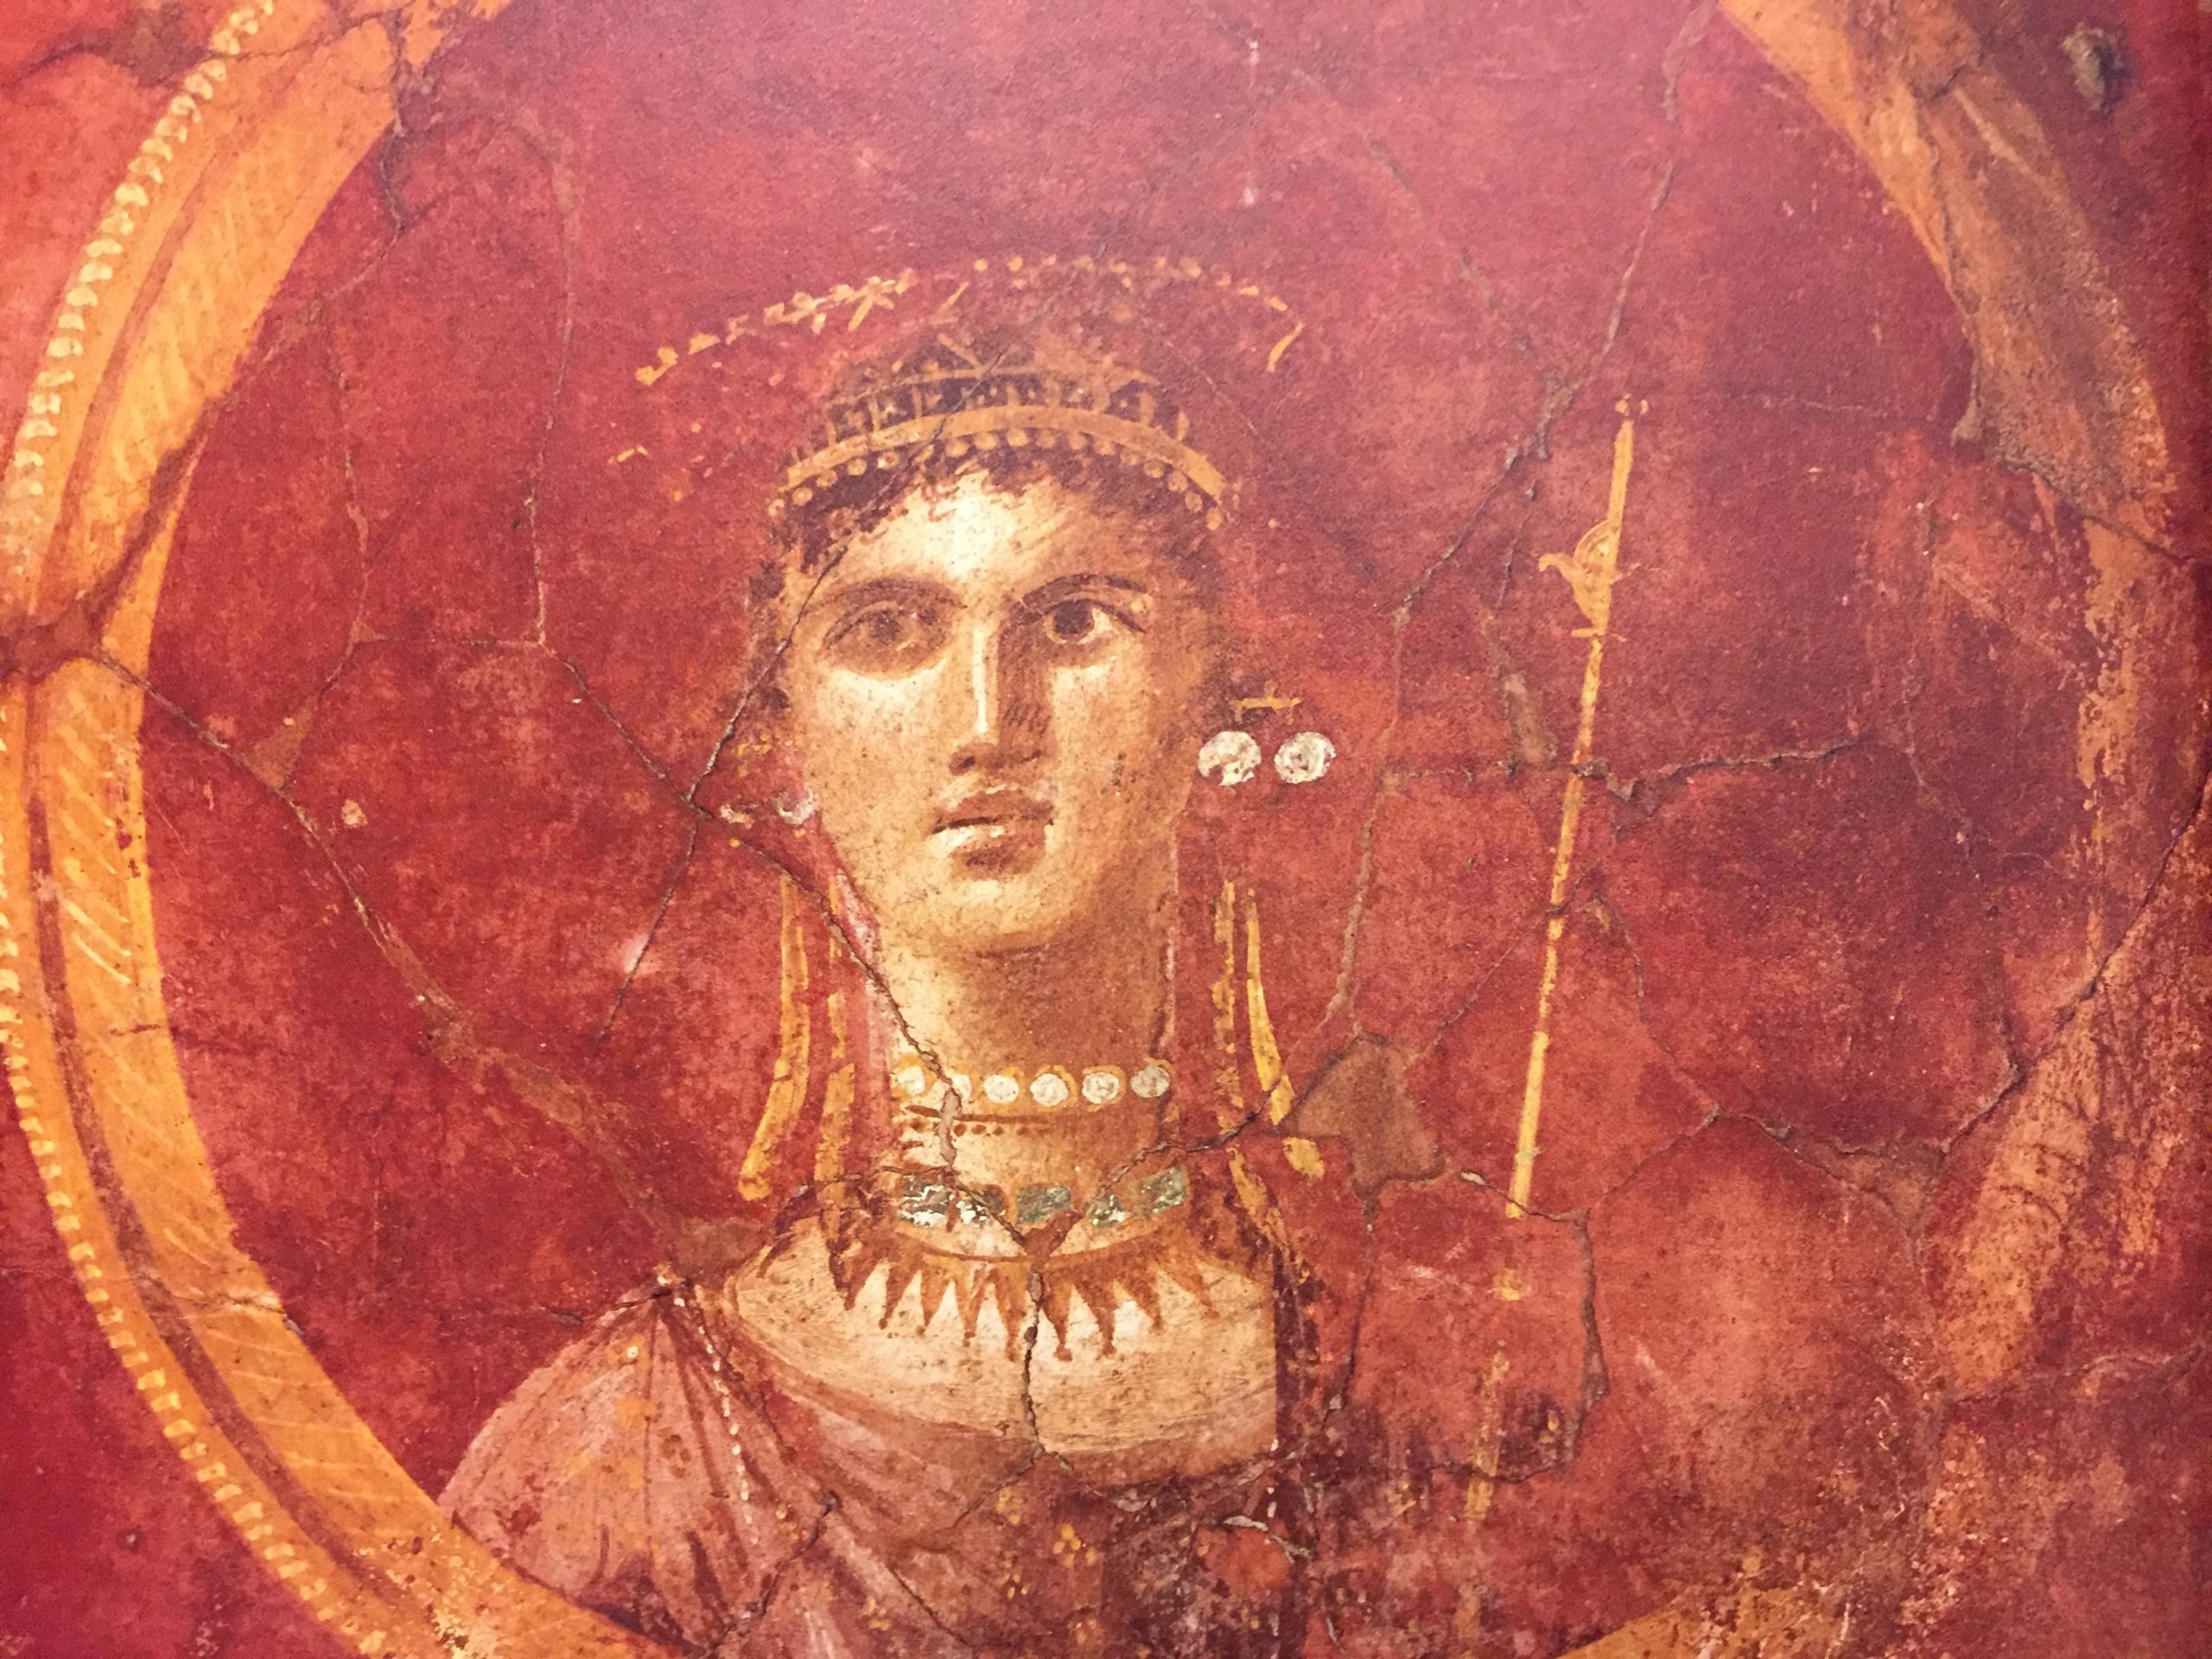 Head and shoulders of Venus wearing a large golden crown and a jeweled necklace. She holds a golden sceptre. Her dress, and the background of the fresco, are in shades of pink and red.